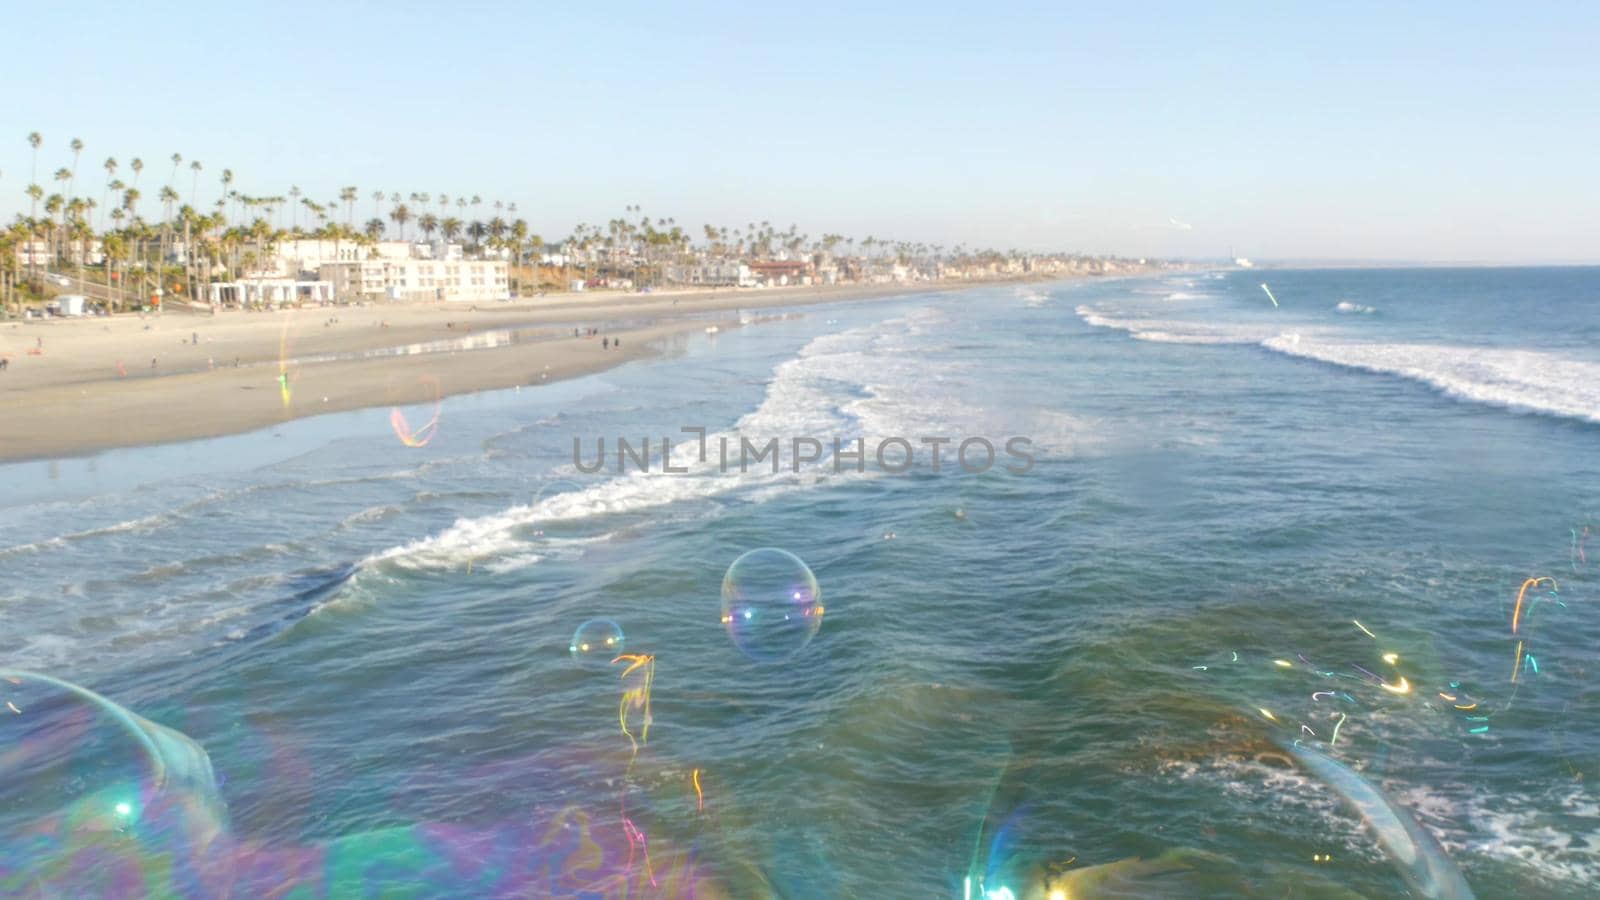 Soap bubbles on pier in California, blurred summertime seamless looped background. Creative romantic metaphor, concept of dreaming, happiness and magic. Abstract symbol of childhood, fantasy, freedom by DogoraSun